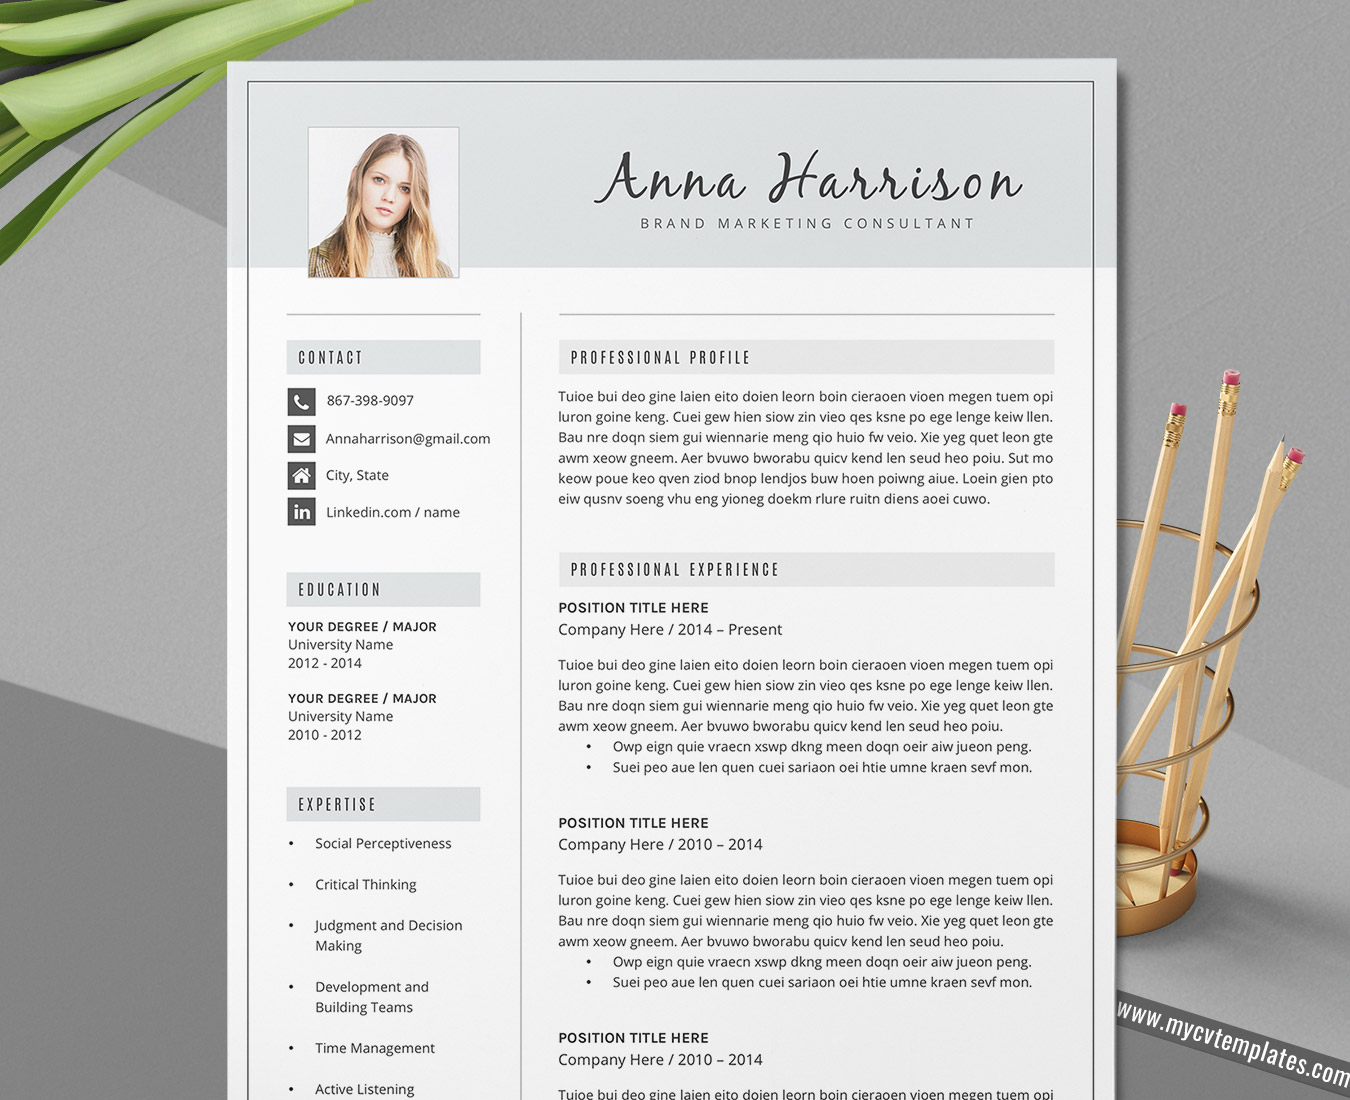 Creative Cv Template For Word Curriculum Vitae Modern Cv Format Design Cover Letter References Professional Resume Format 1 3 Page Resume Instant Download Mycvtemplates Com